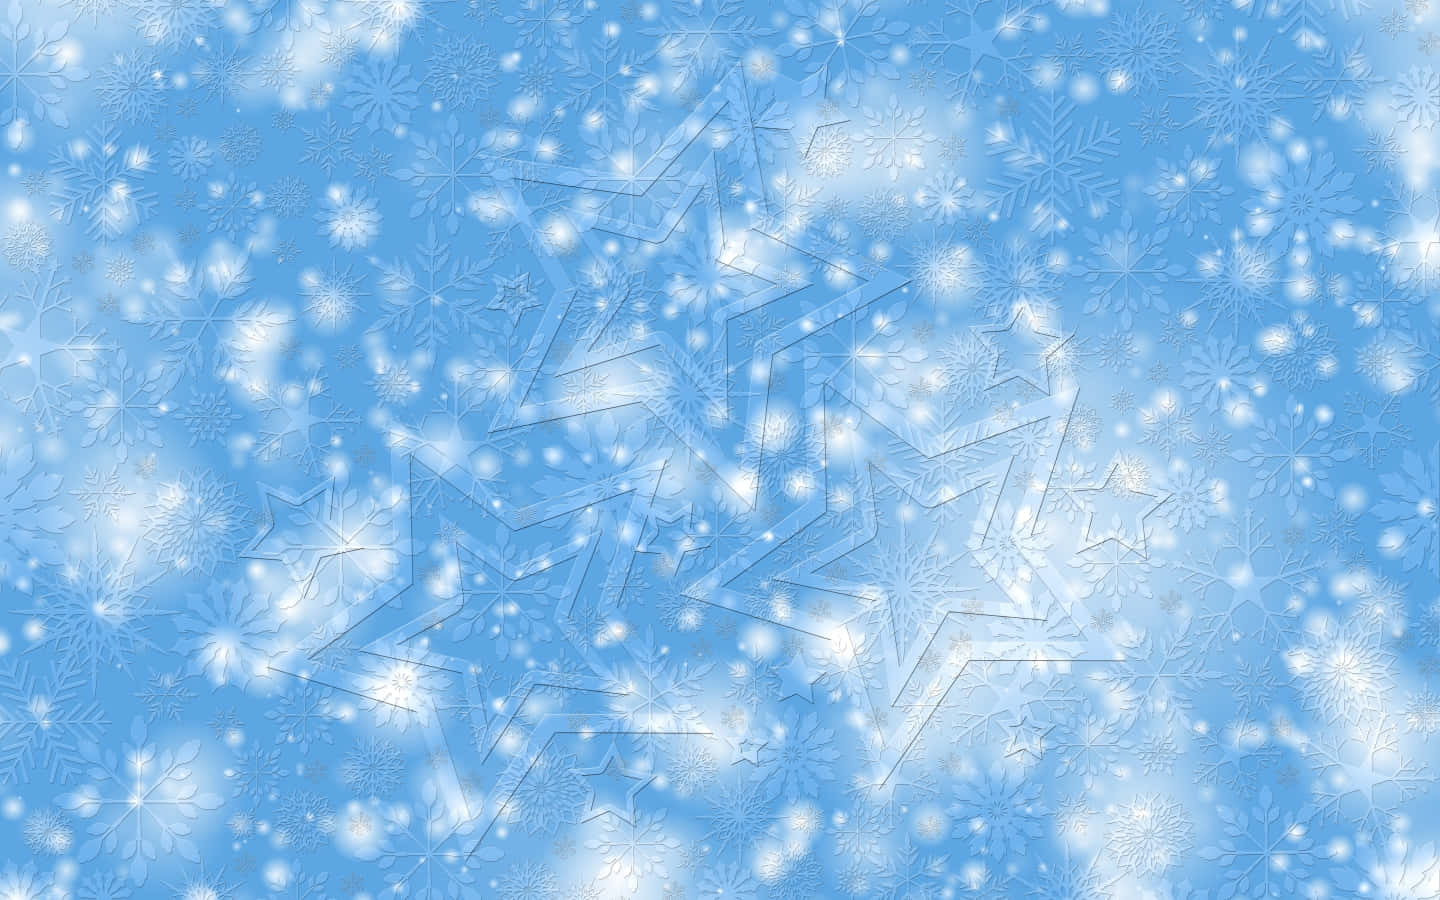 : A beautiful snowflake fractal on a blue winter background